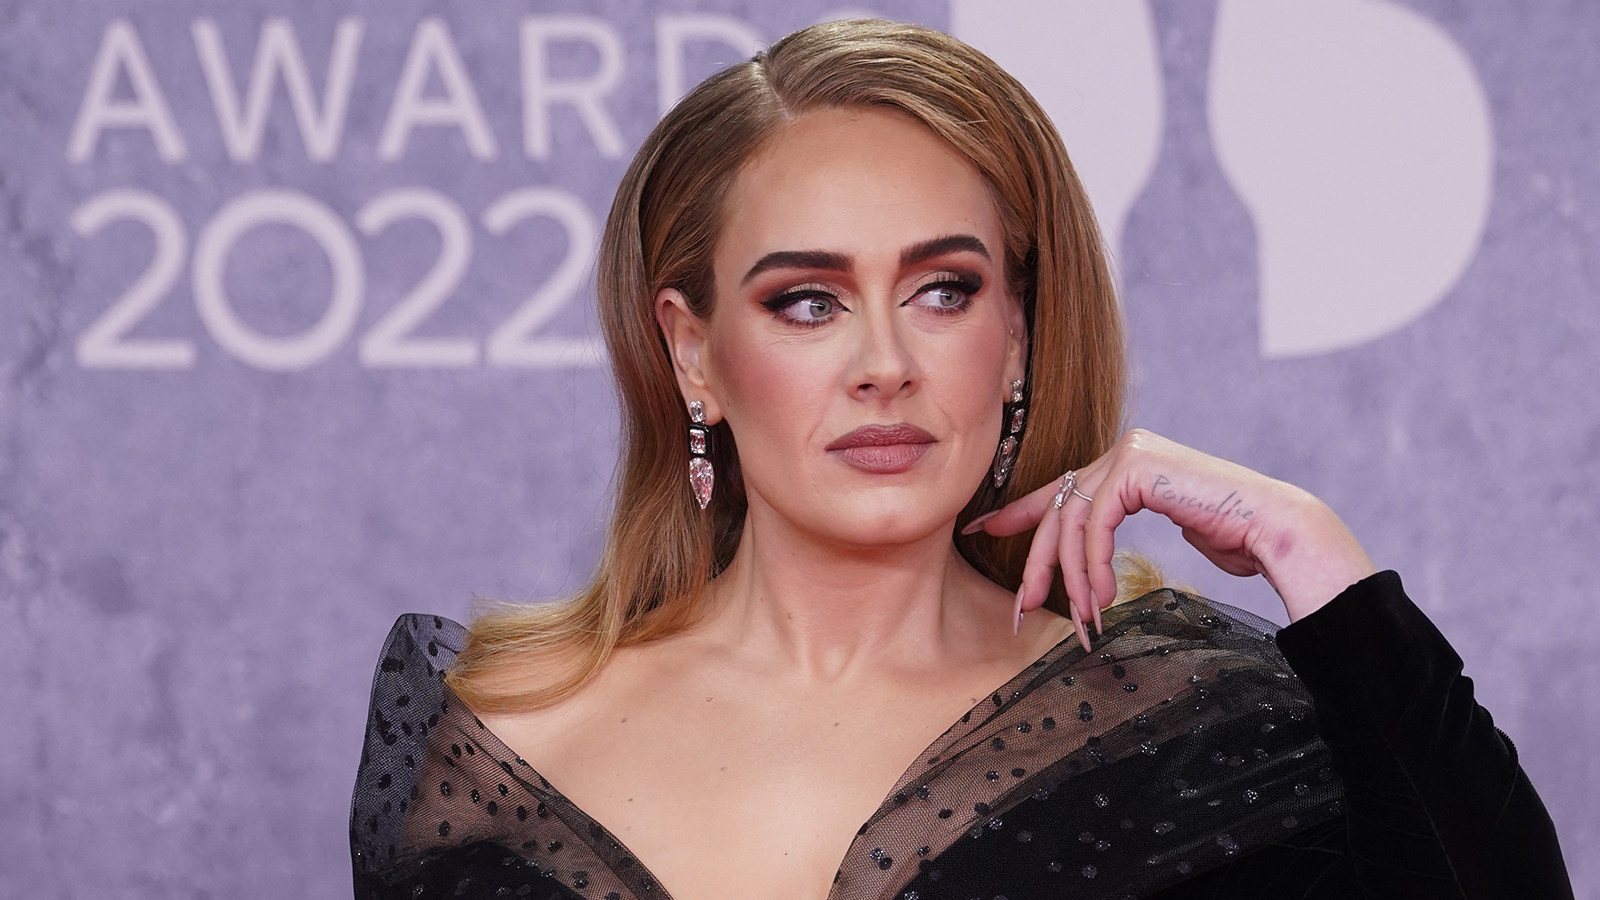 Adele poses on the red carpet at the Brit Awards in London in February 2022. Photo: TNS